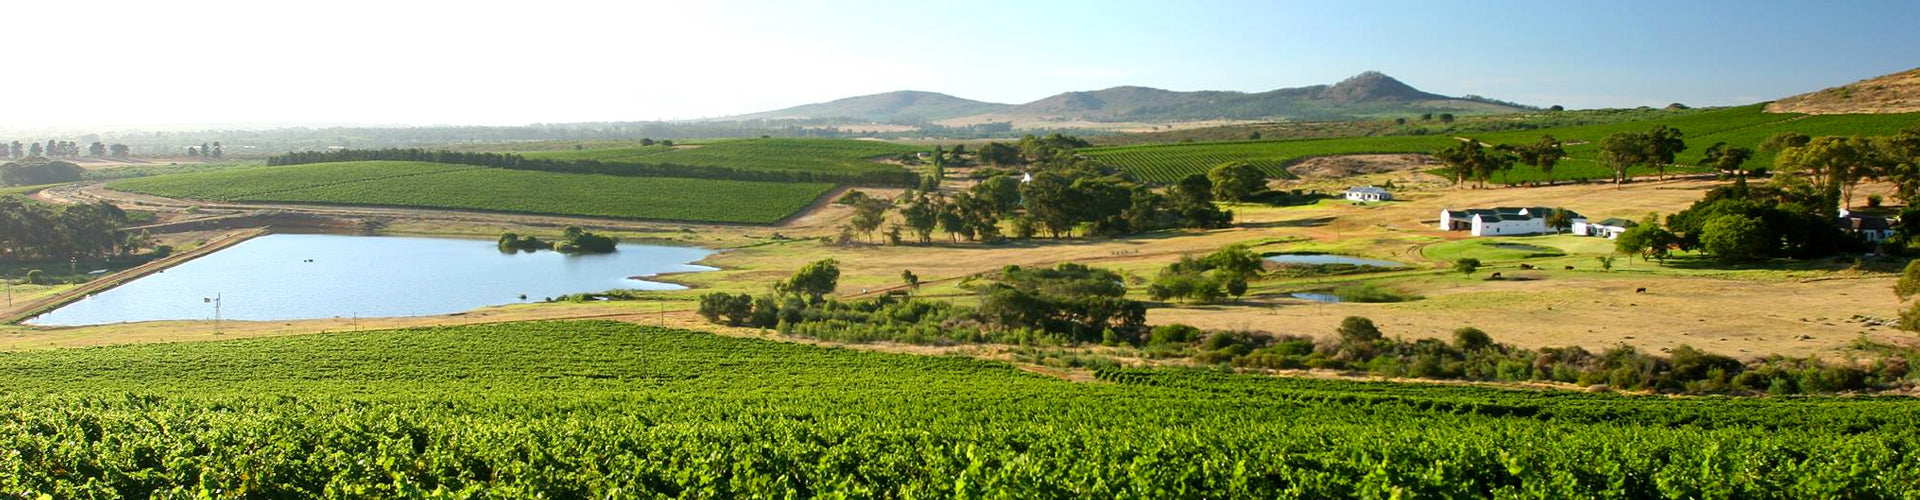 Cloof Wine Estate and Vineyards in Darling, South Africa